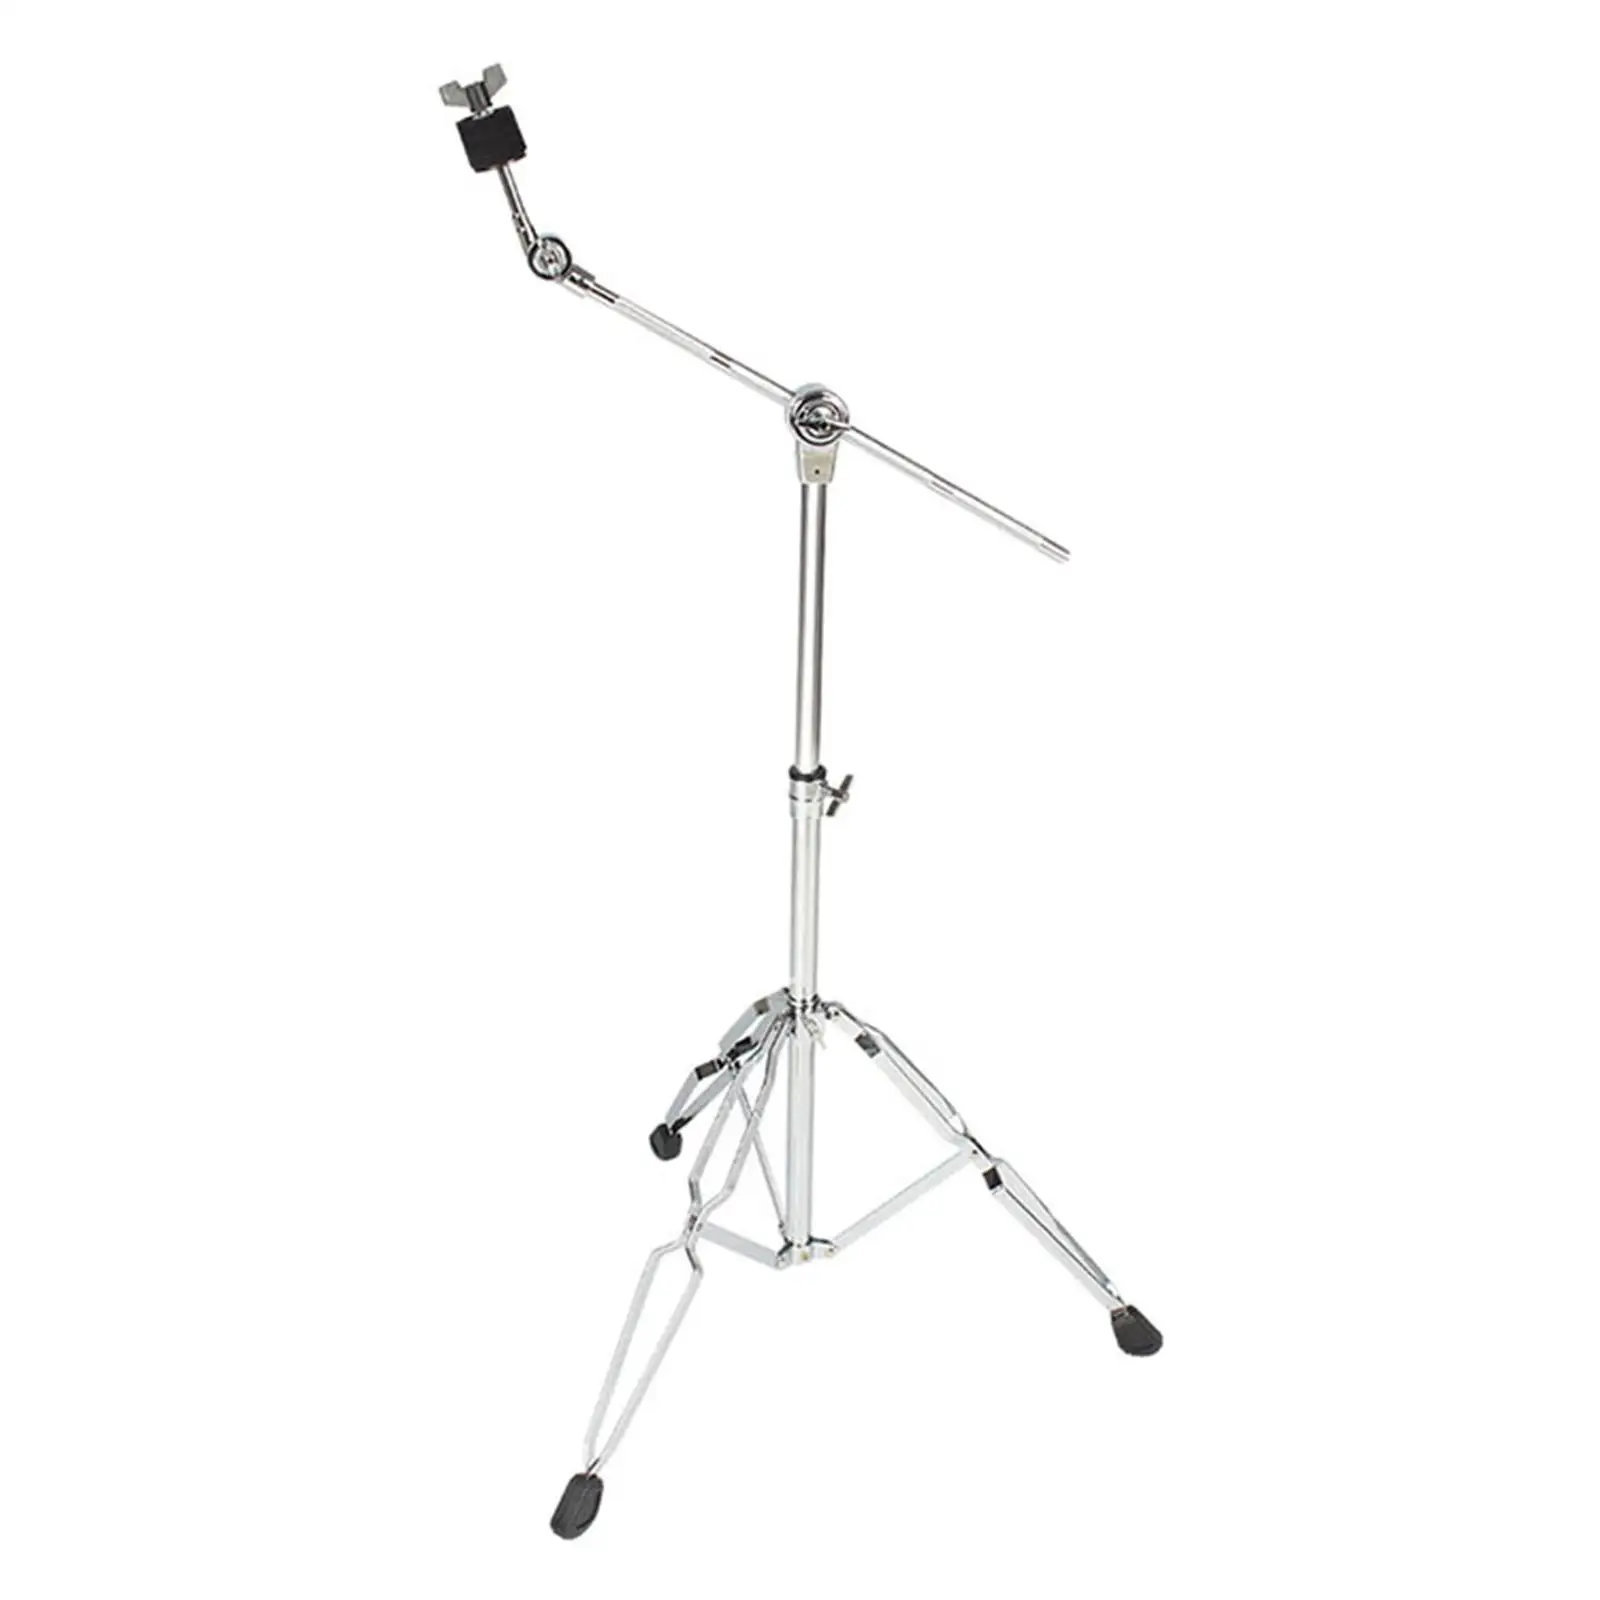 

Cymbal Stand Adjustable Foldable Height Adjustment 80cm-130cm Portable Accessory Heavy Duty Metal Tube Durable Universal